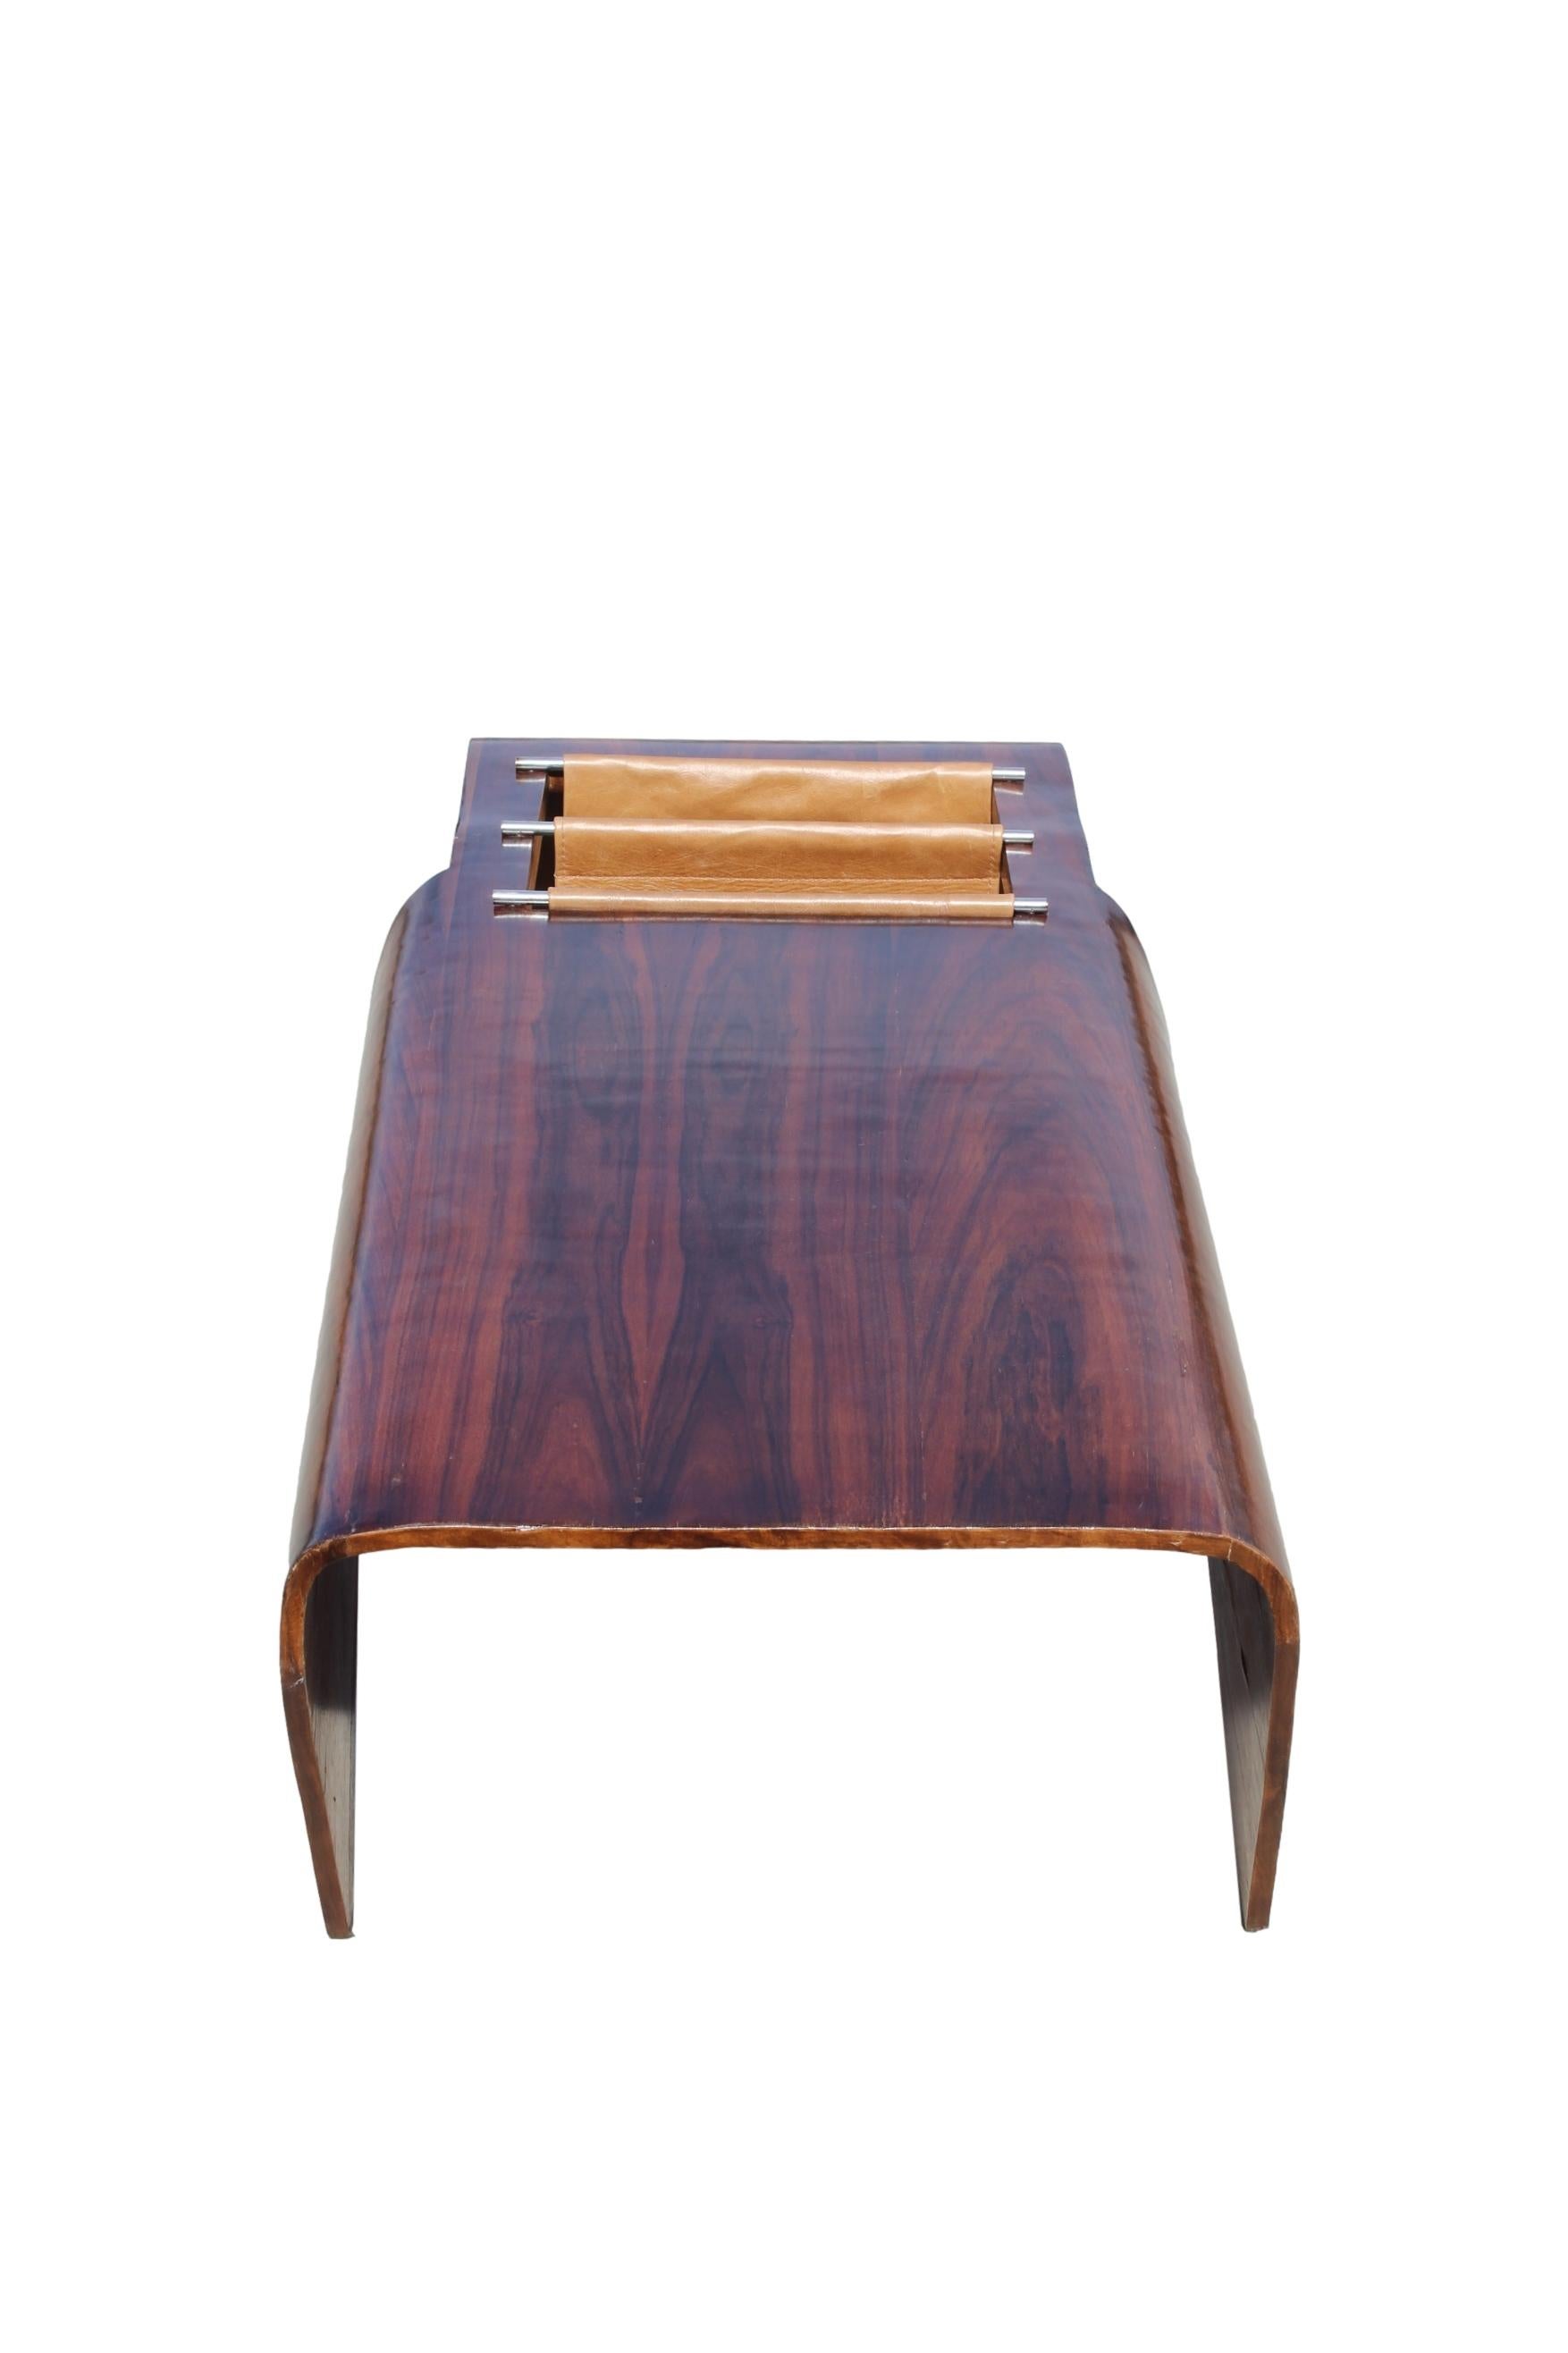 Andorinha coffee table attributed to Jorge Zalszupin Mid-Century Modern 60' In Good Condition For Sale In Houston, TX